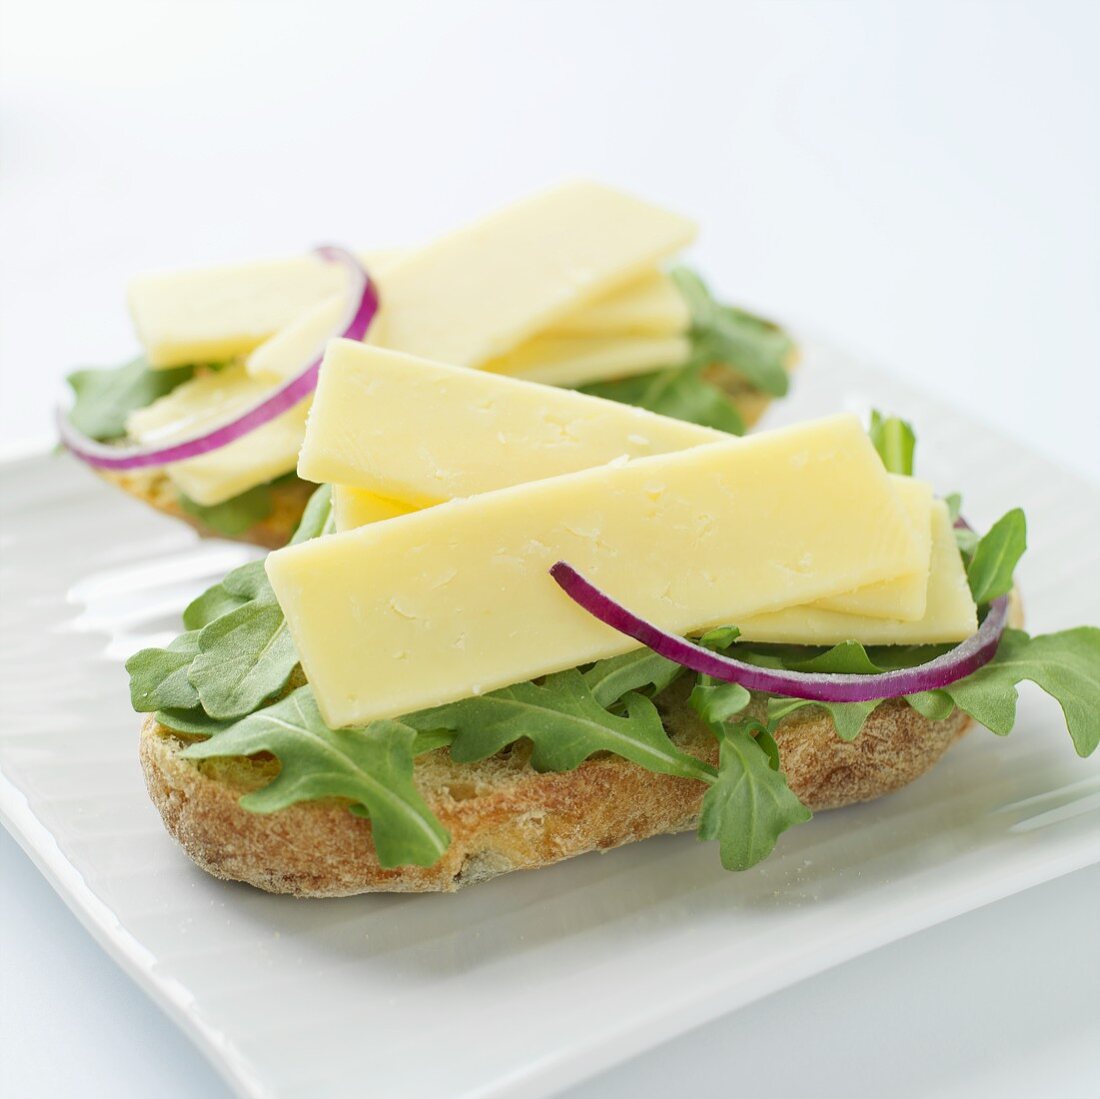 Cheddar cheese, rocket and red onion on bread rolls